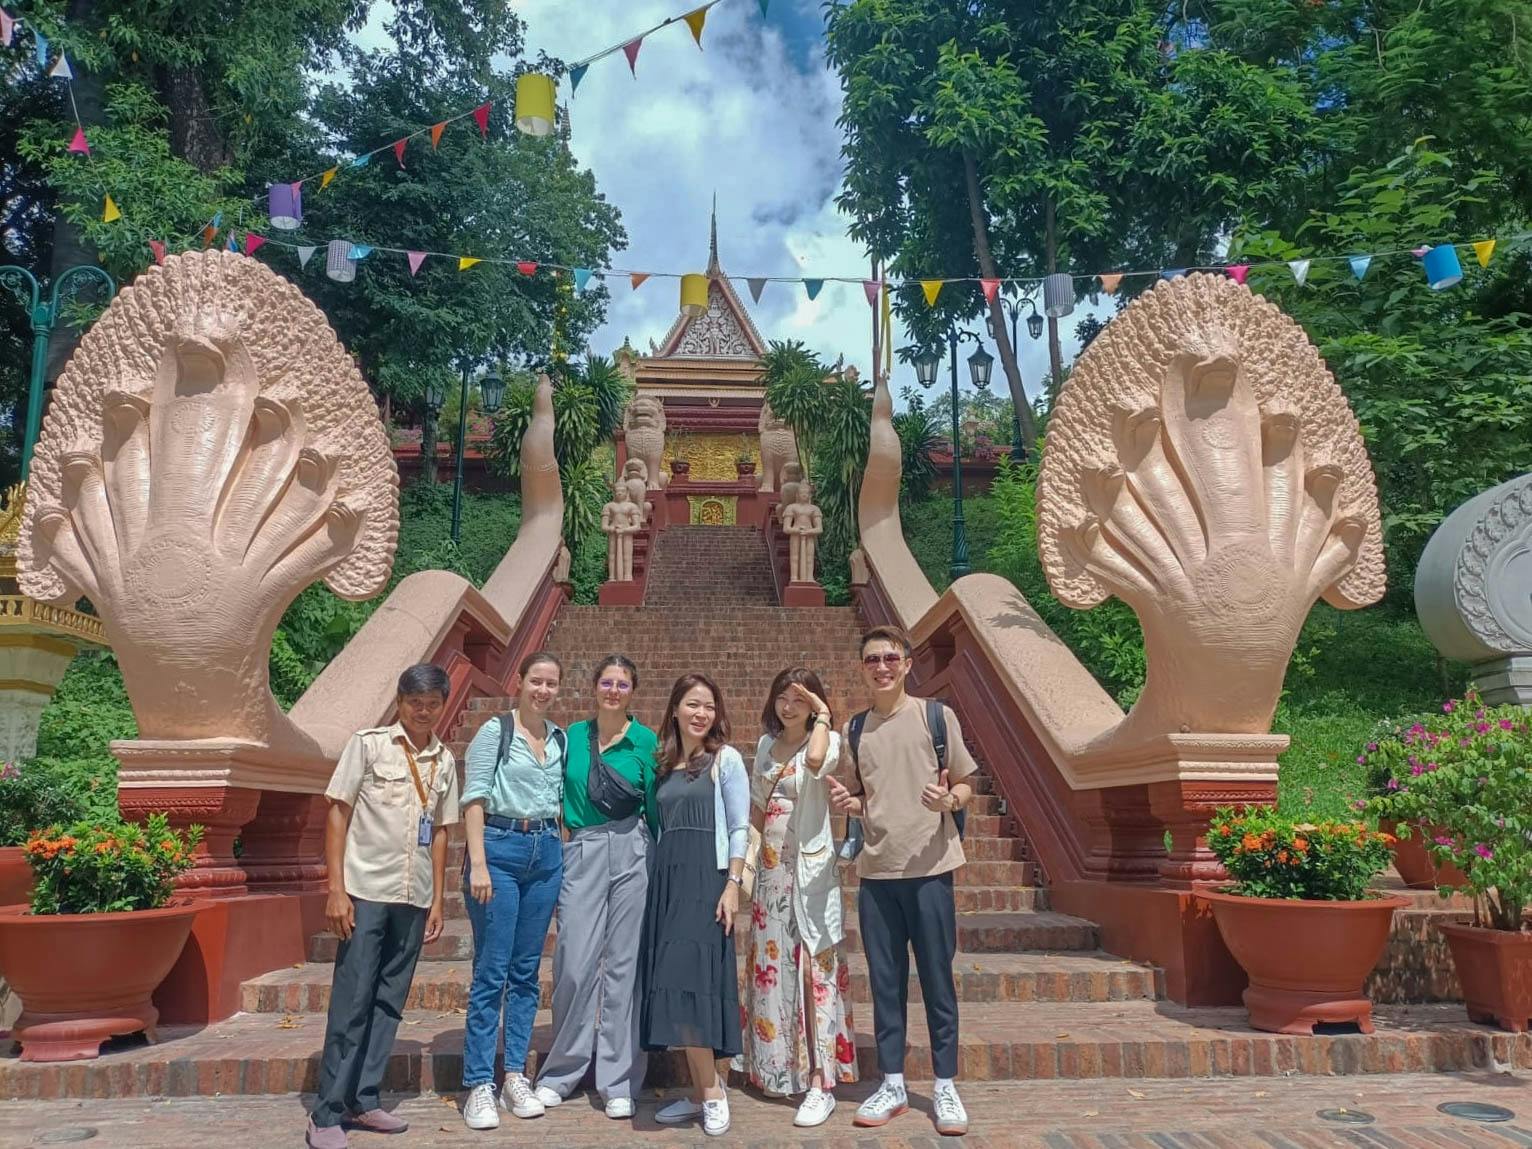 Guided historical tour of Phnom Penh with transportation